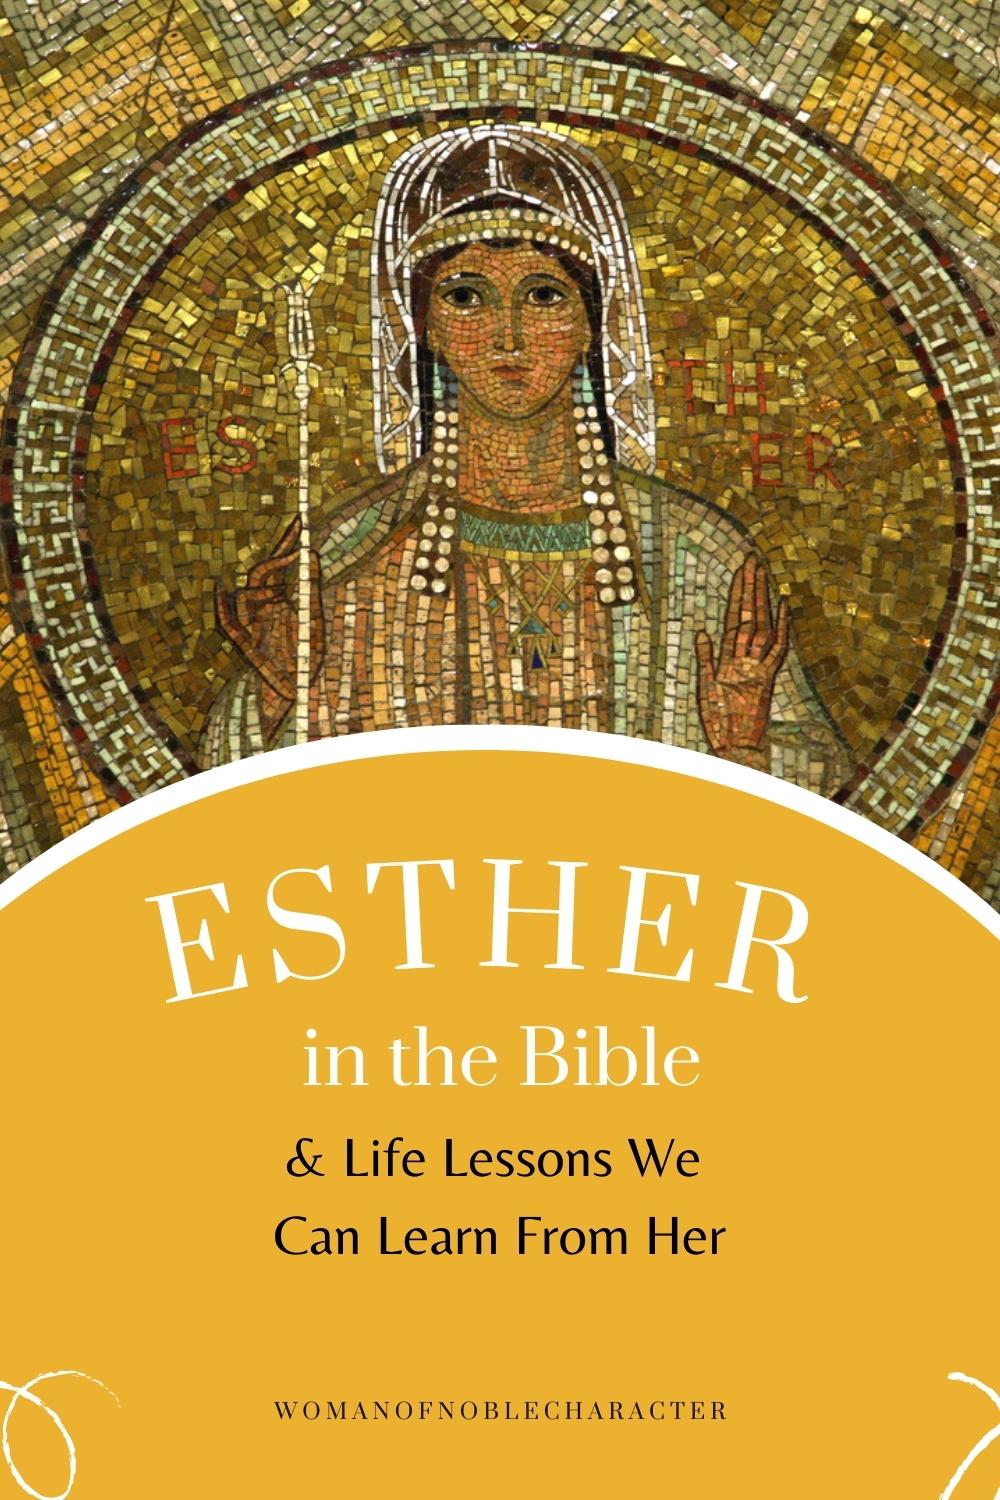 image of tile mosaic of Queen Esther with the text Esther in the Bible & life lessons we can learn from her